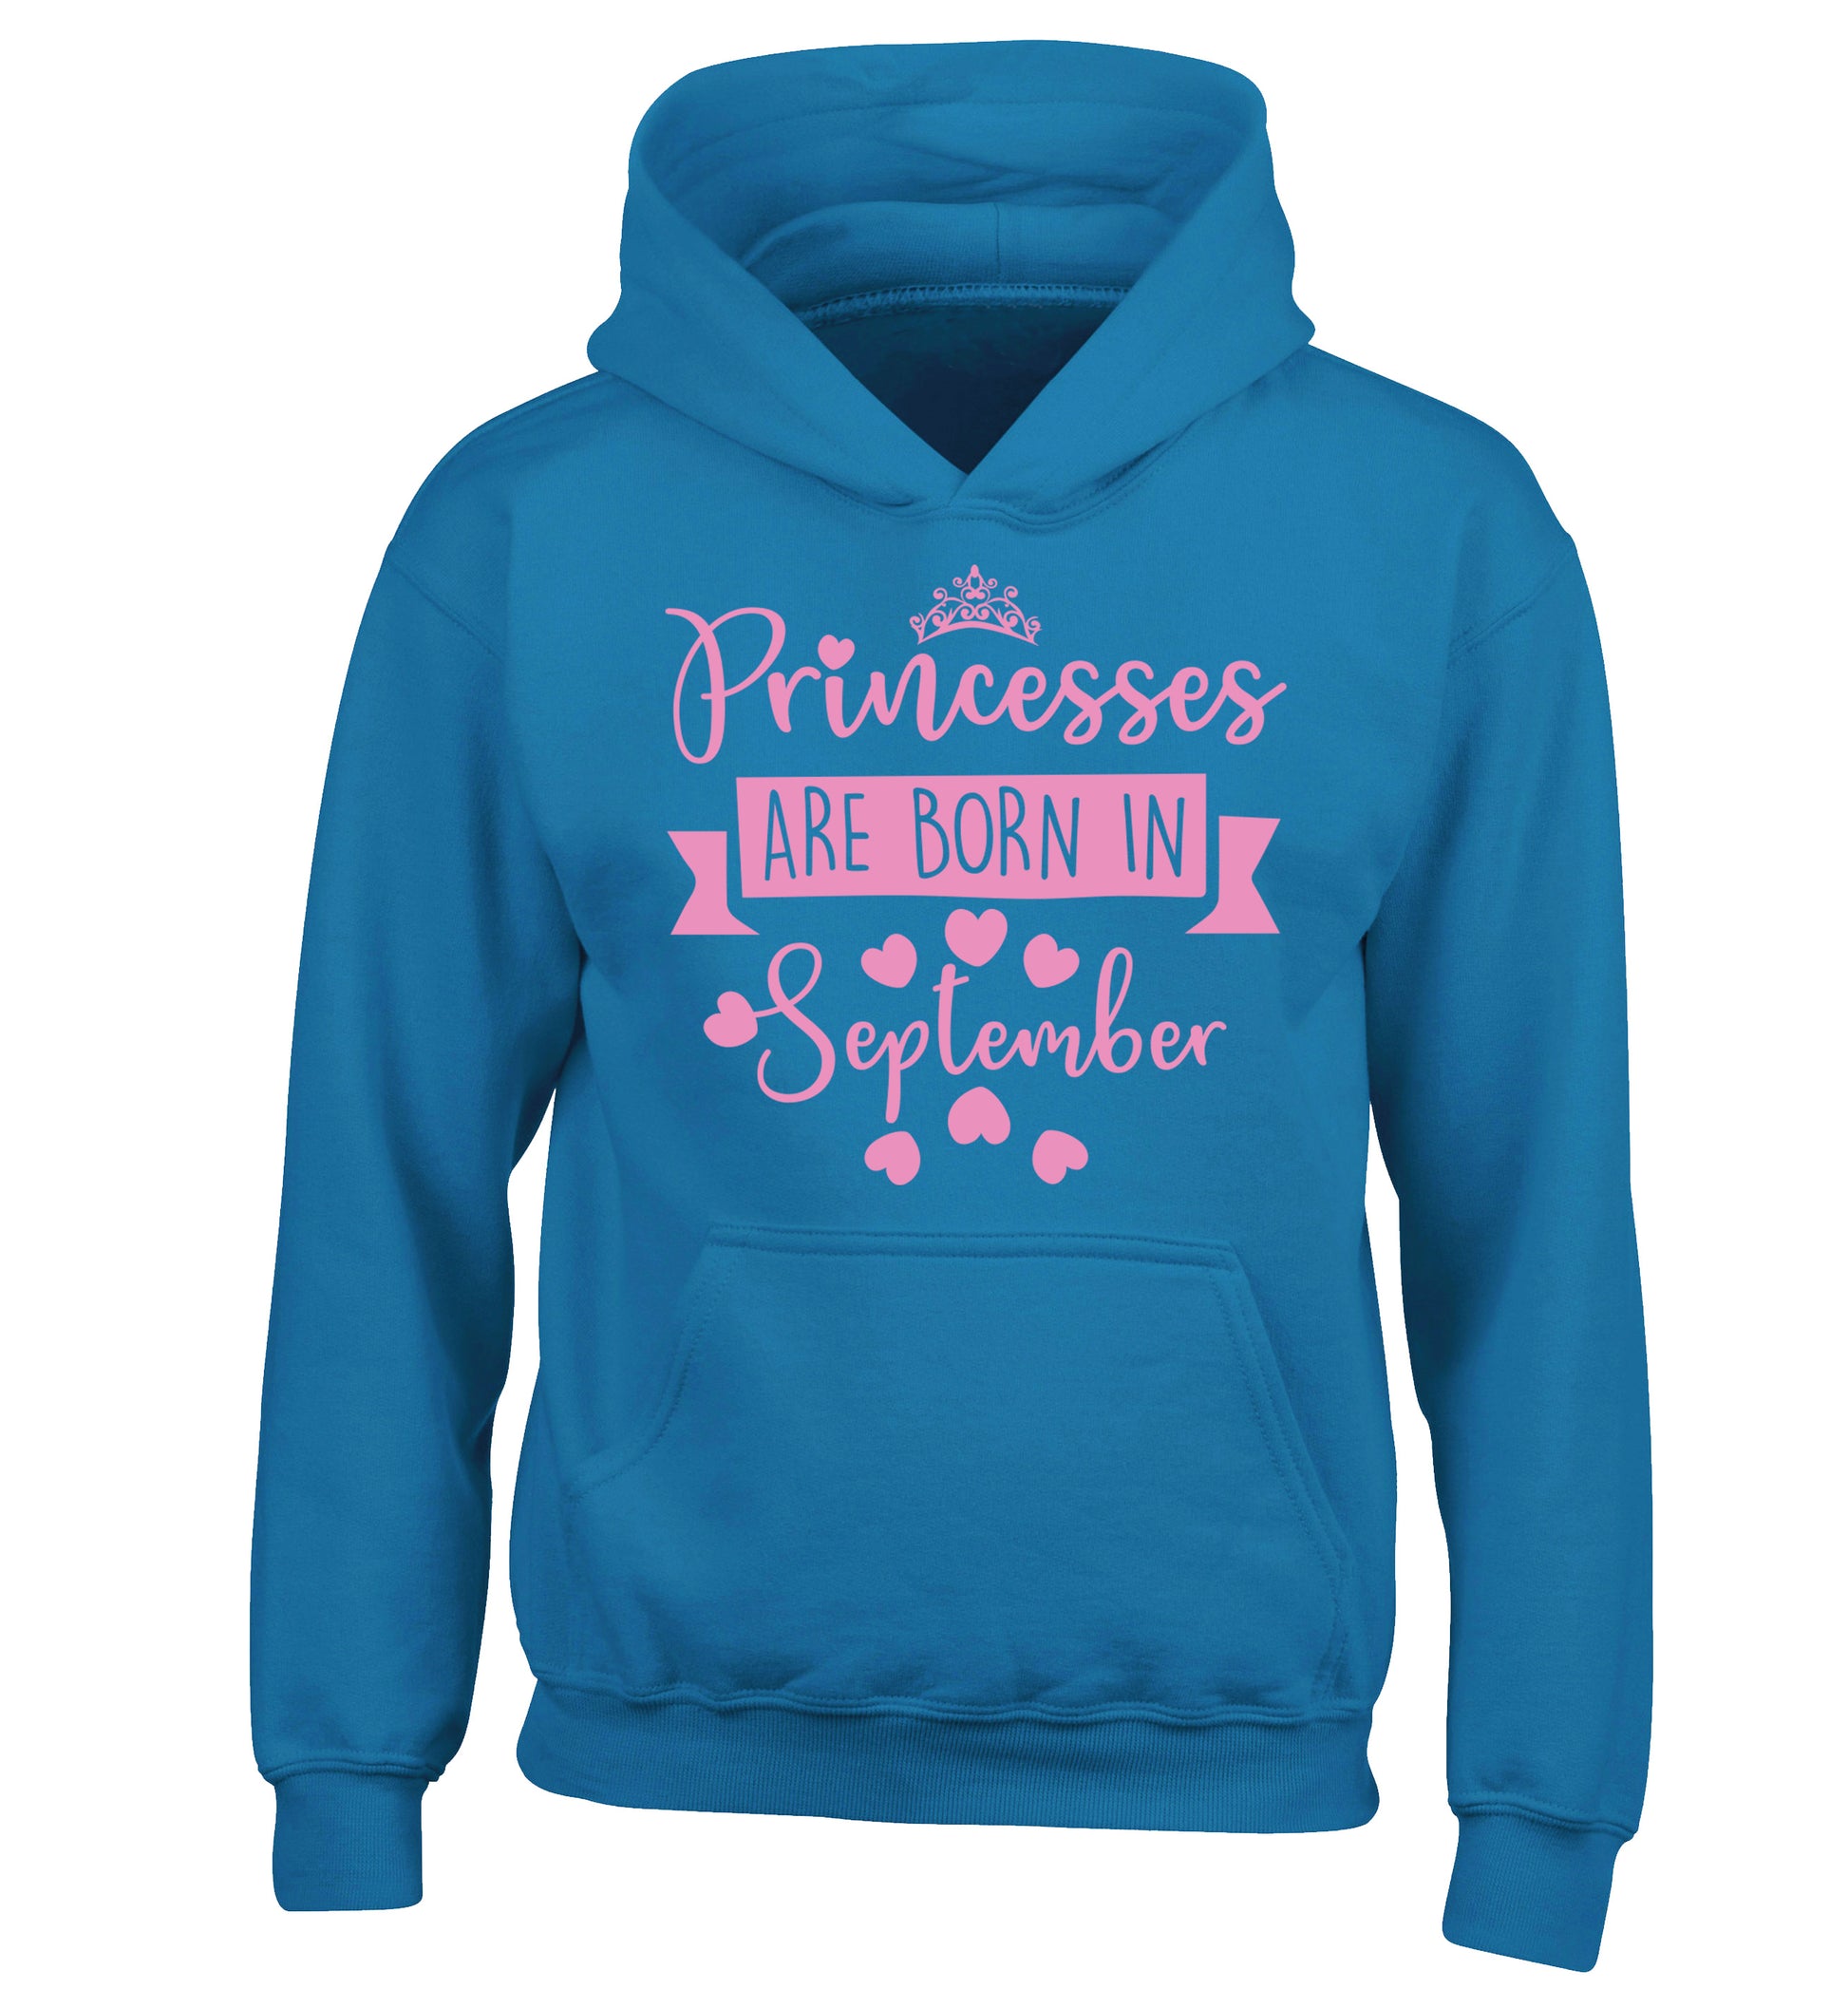 Princesses are born in September children's blue hoodie 12-13 Years